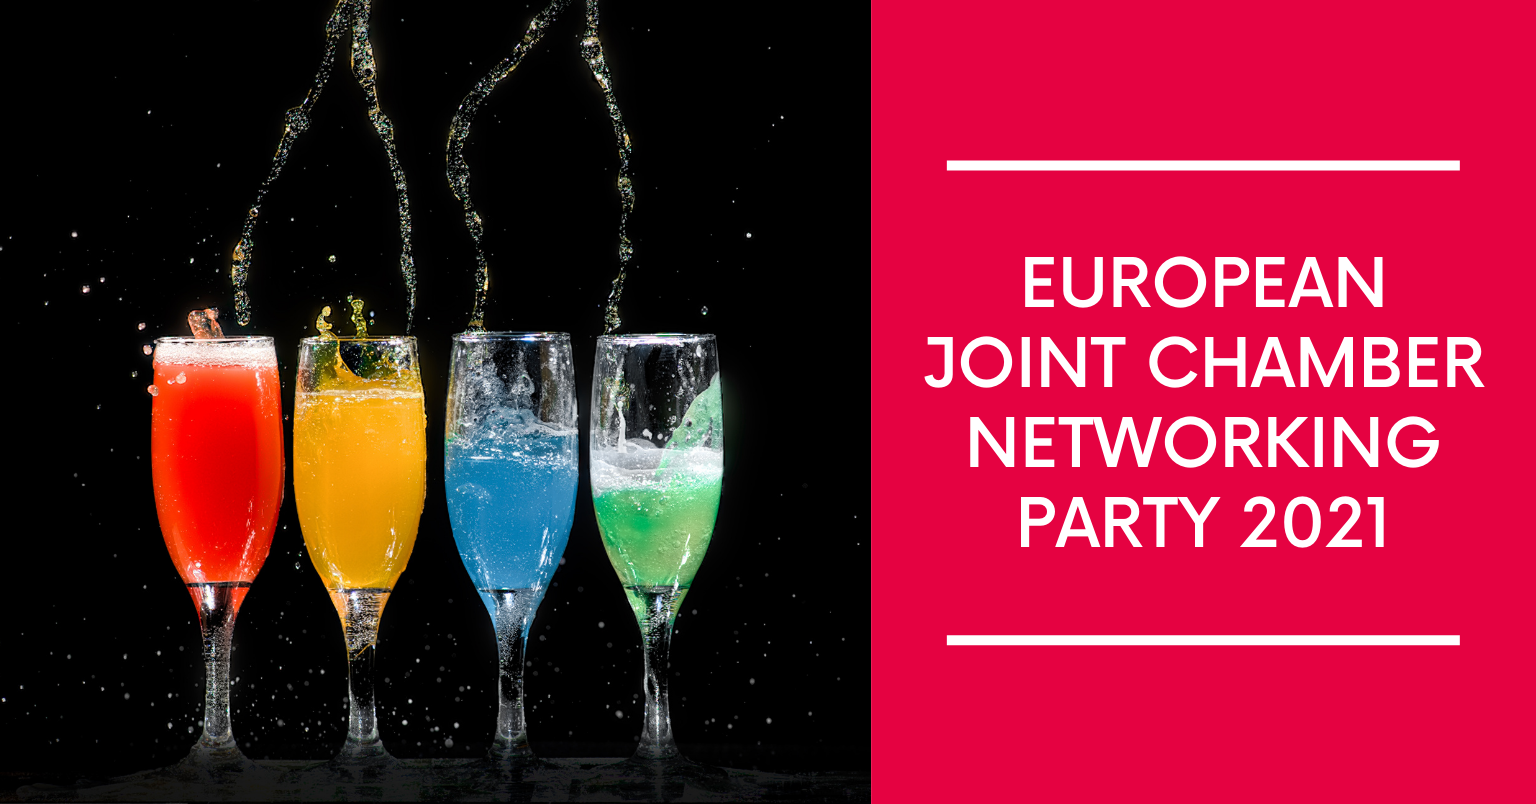 European Joint Chamber Networking Party 2021